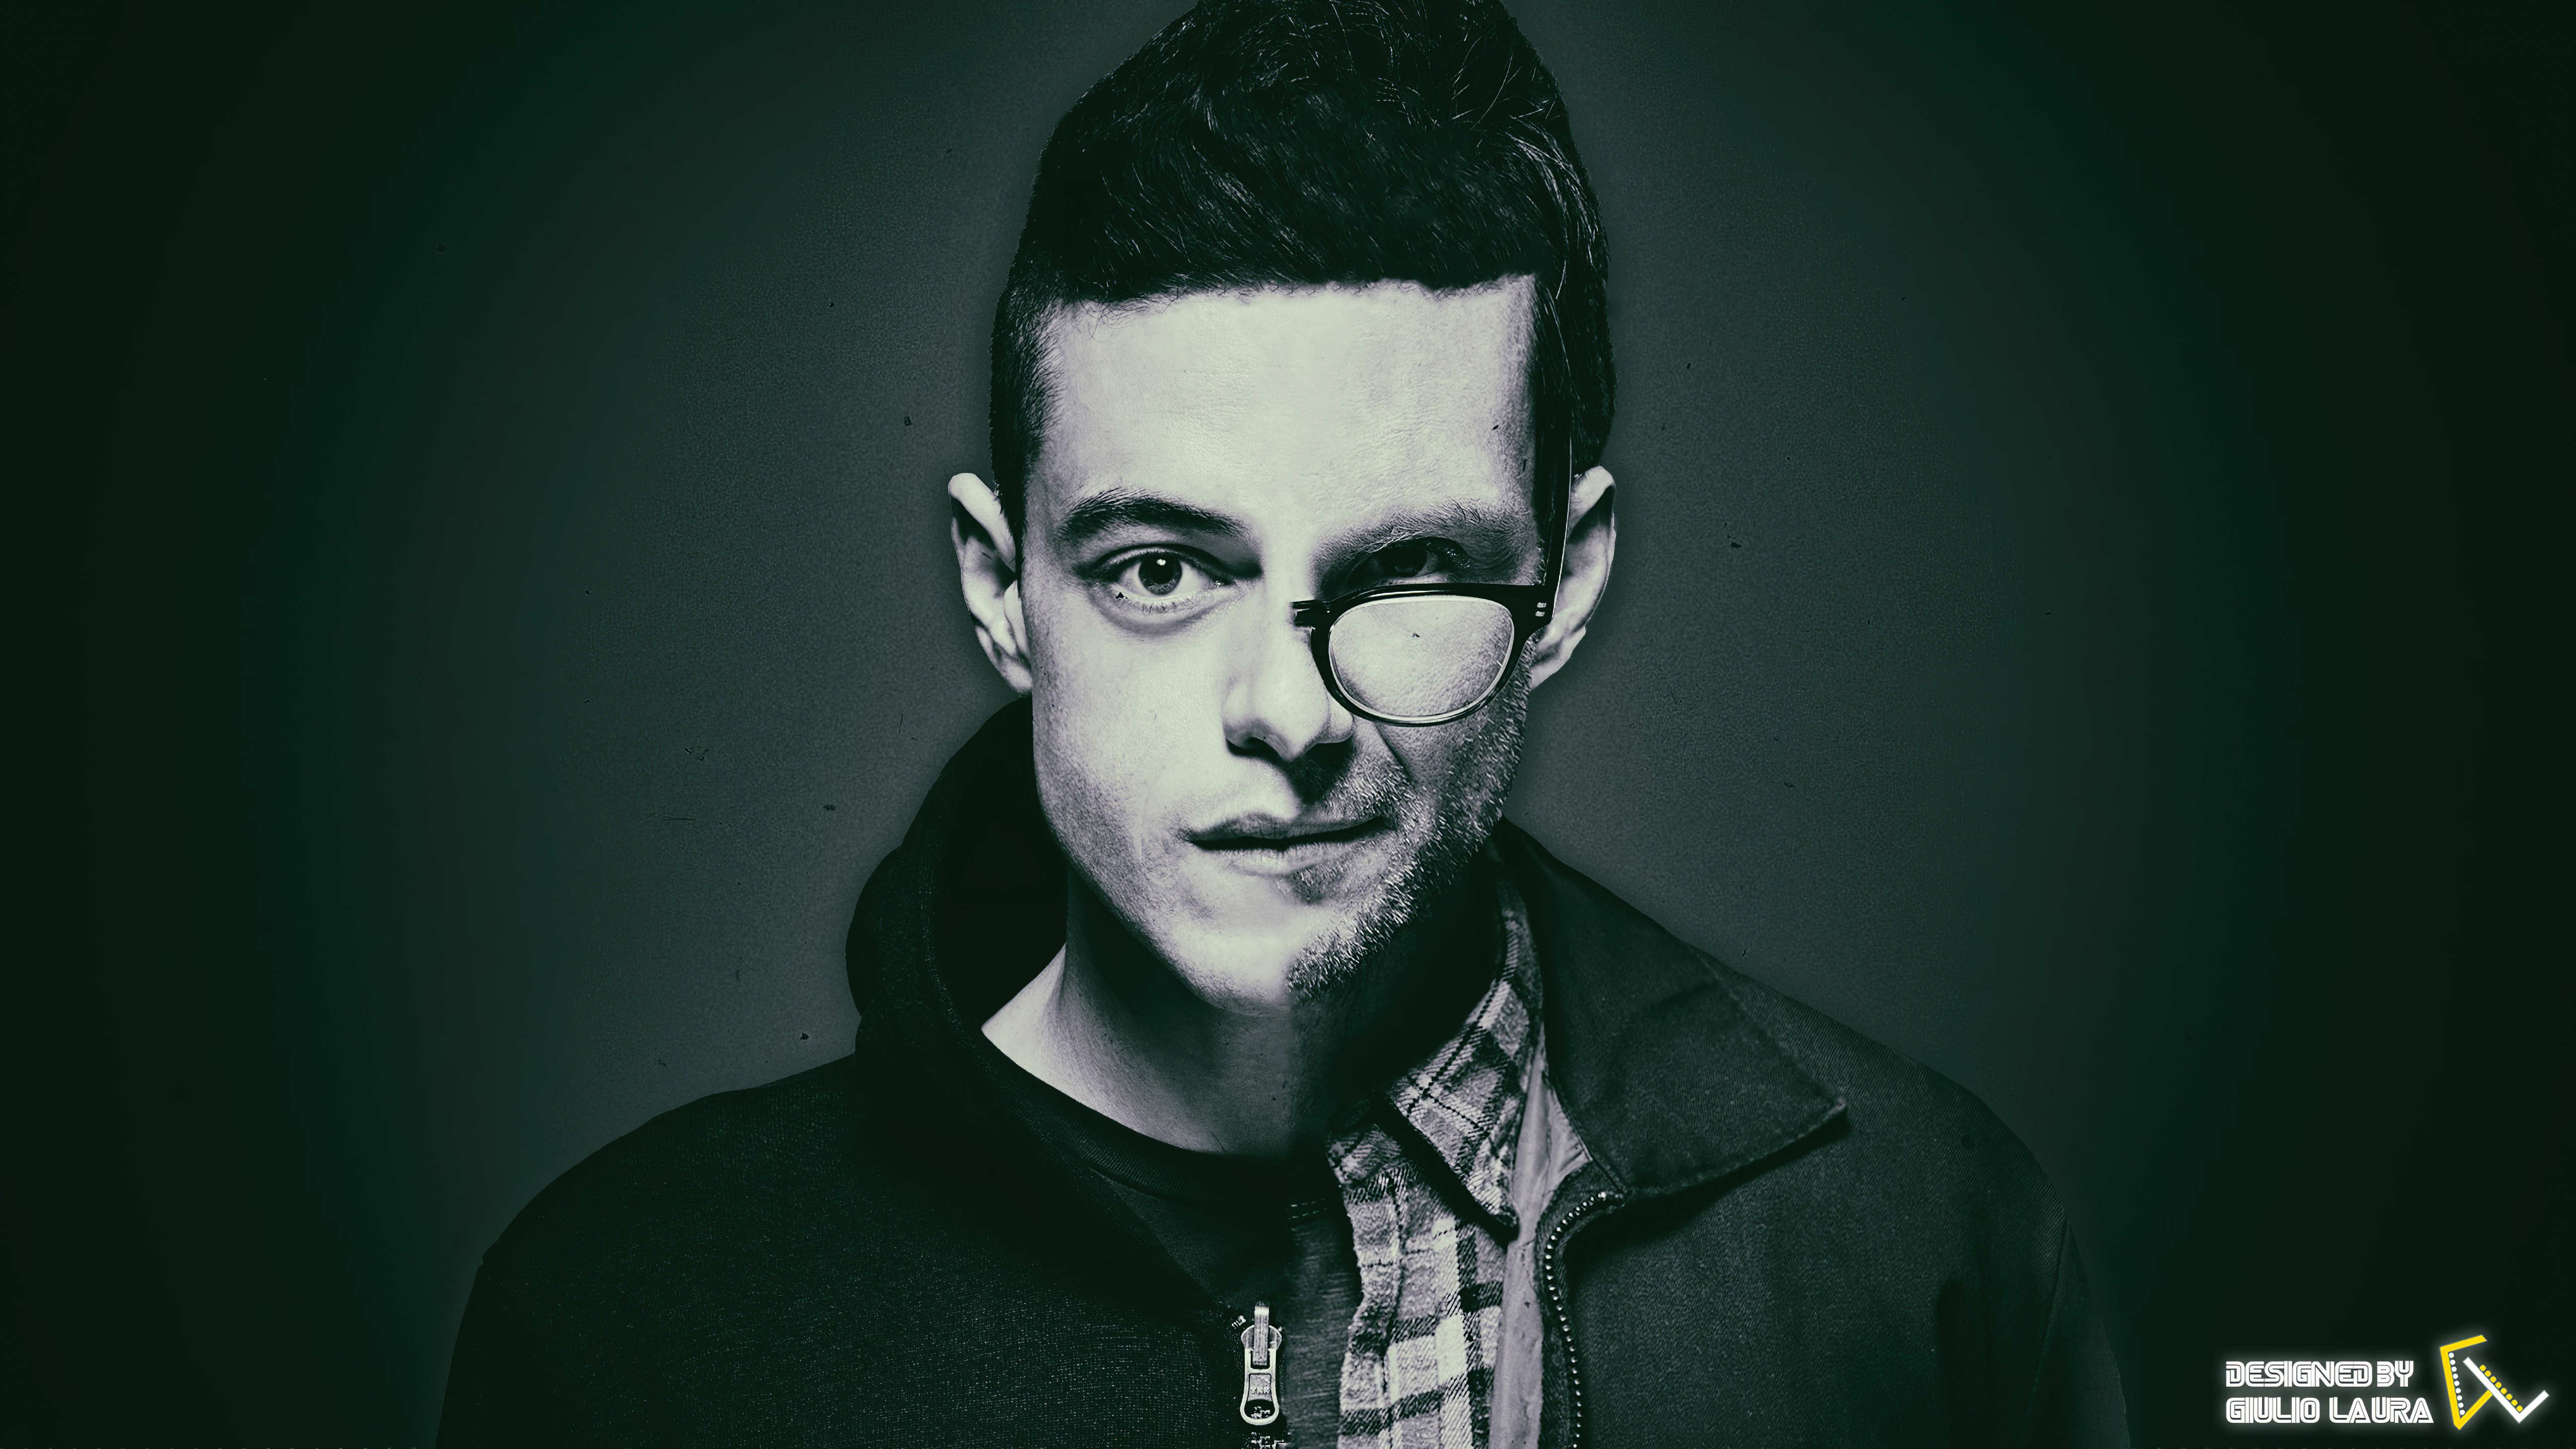 Mr. Robot Wallpaper, HD TV Series 4K Wallpapers, Images and